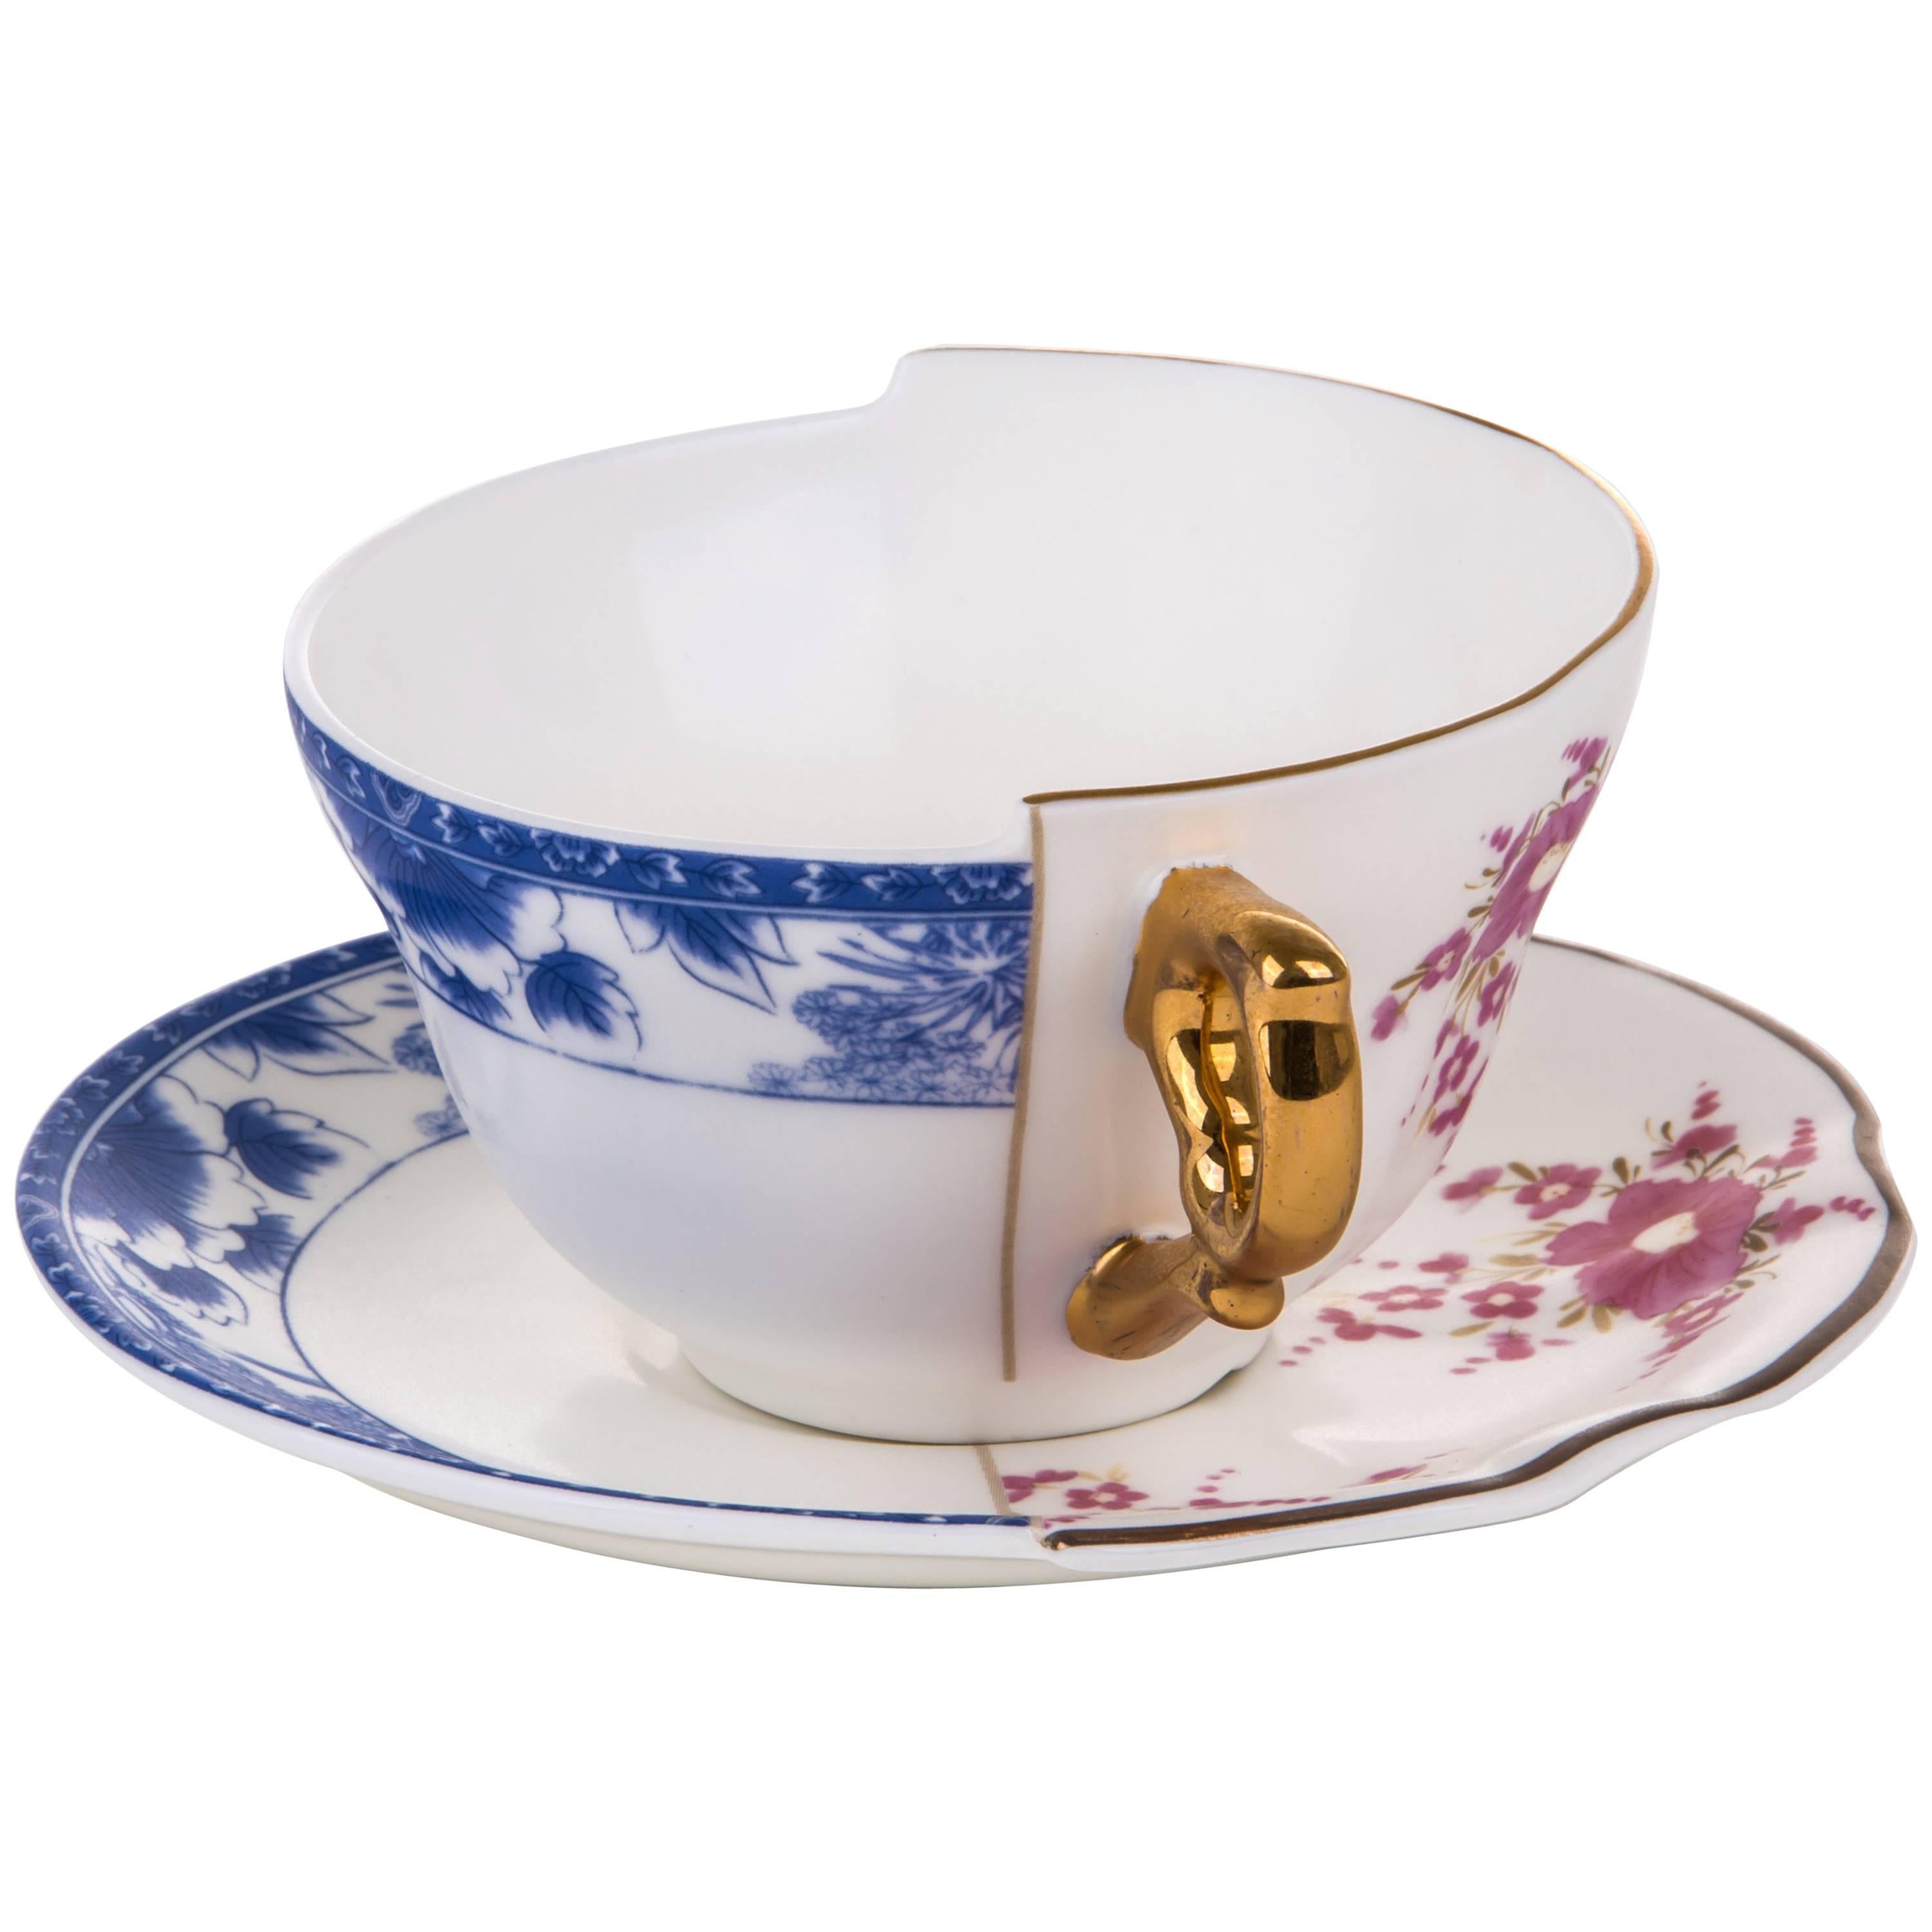 Seletti ‘Hybrid-Zenobia’ Teacup with Saucer in Porcelain